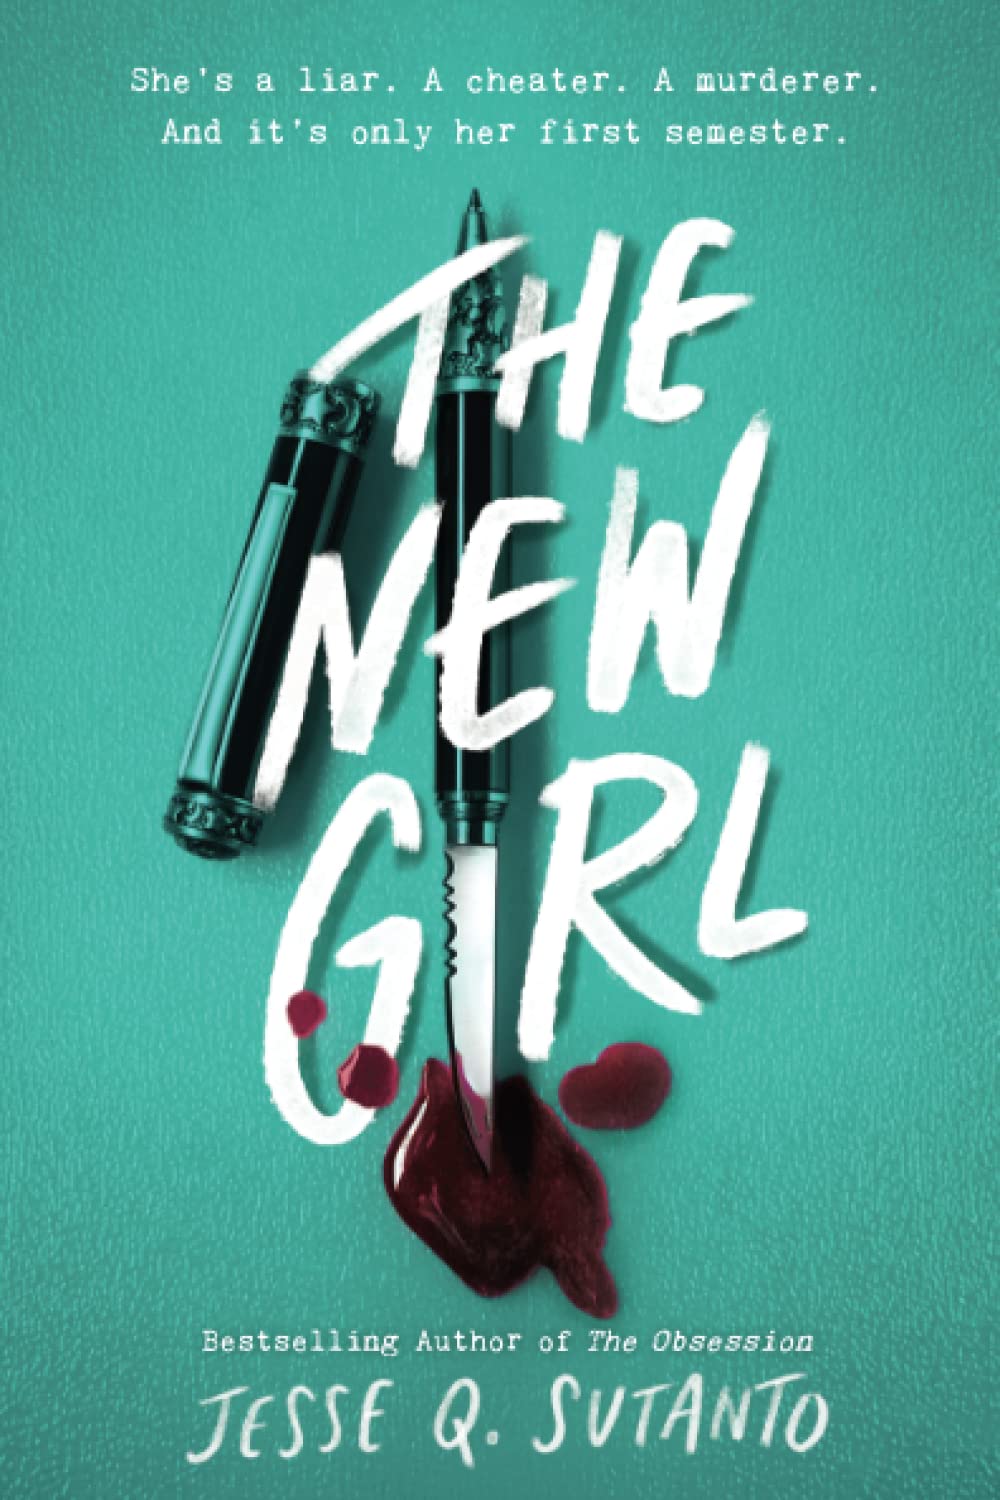 Cover of “The New Girl” by Jesse Q. Sutanto